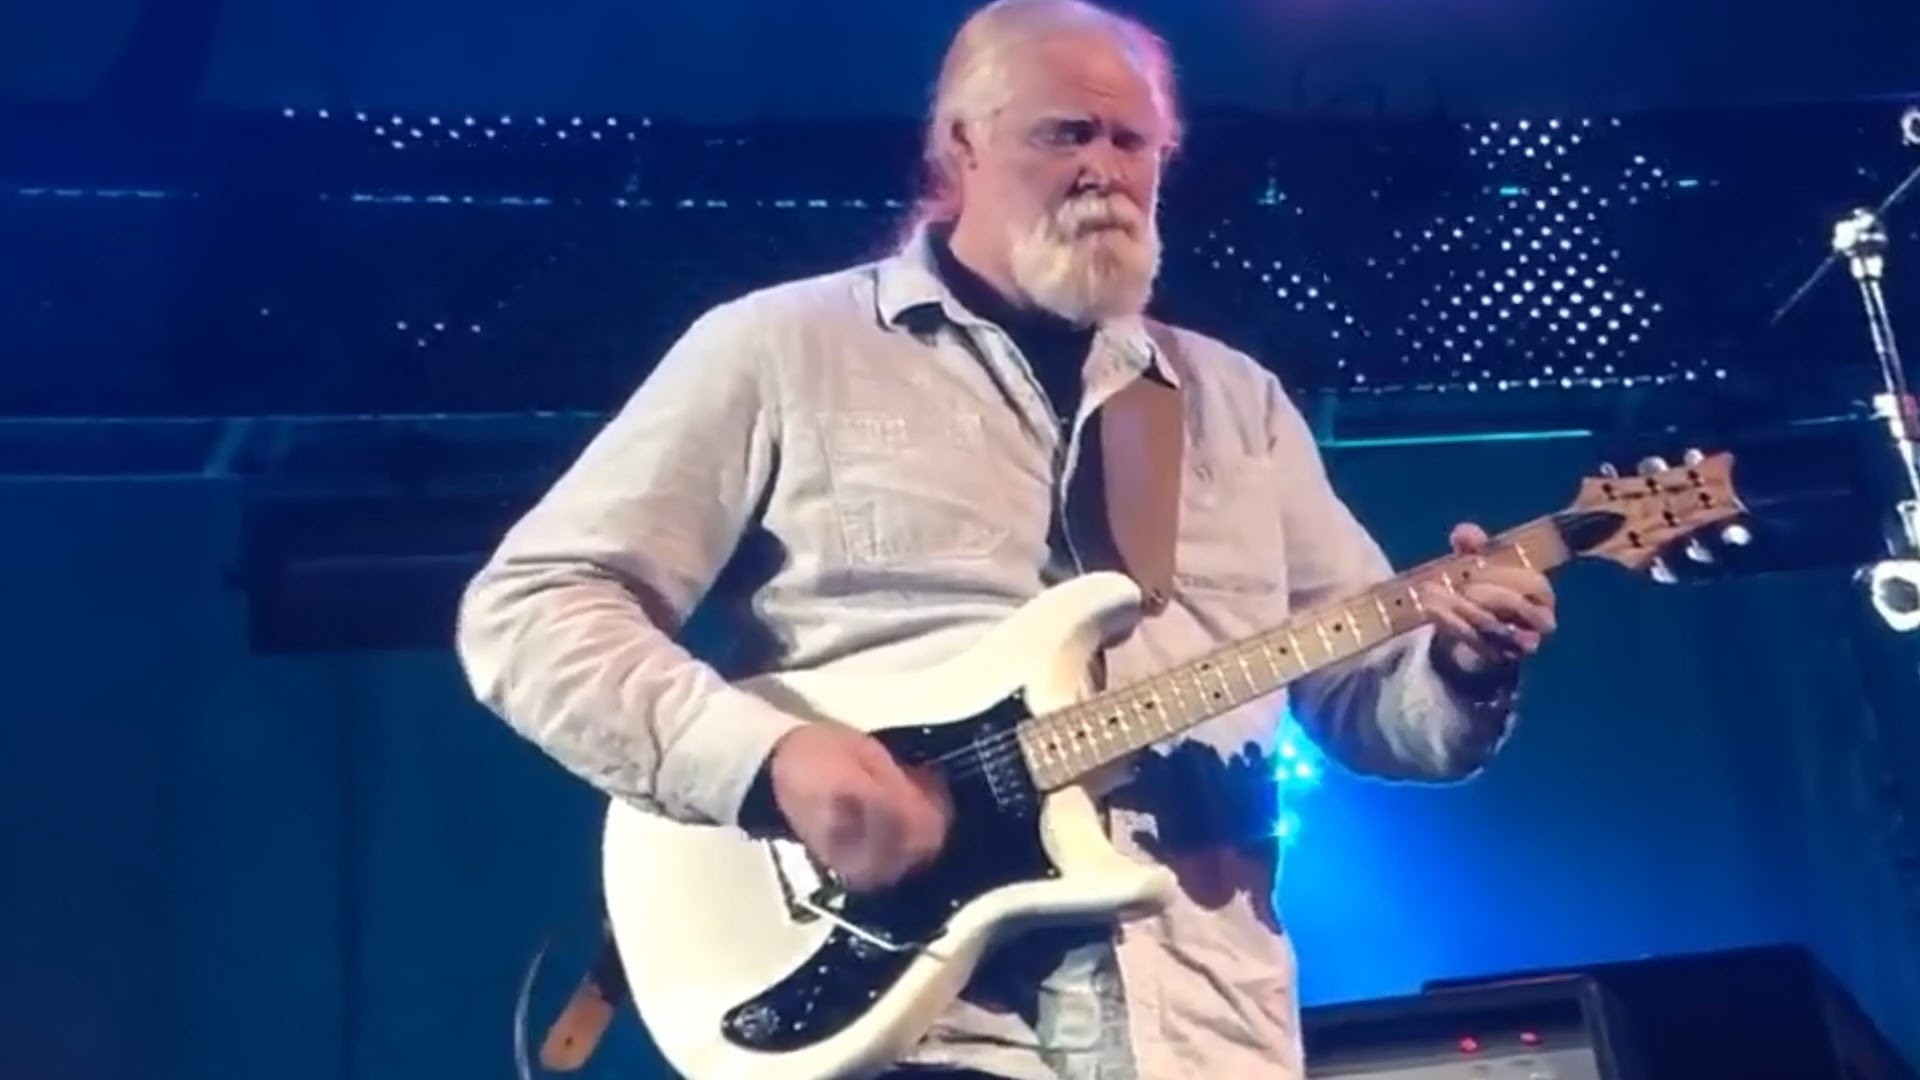 1920x1080 Watch Jimmy Herring Erupt with Dave Matthews Band on “Raven”